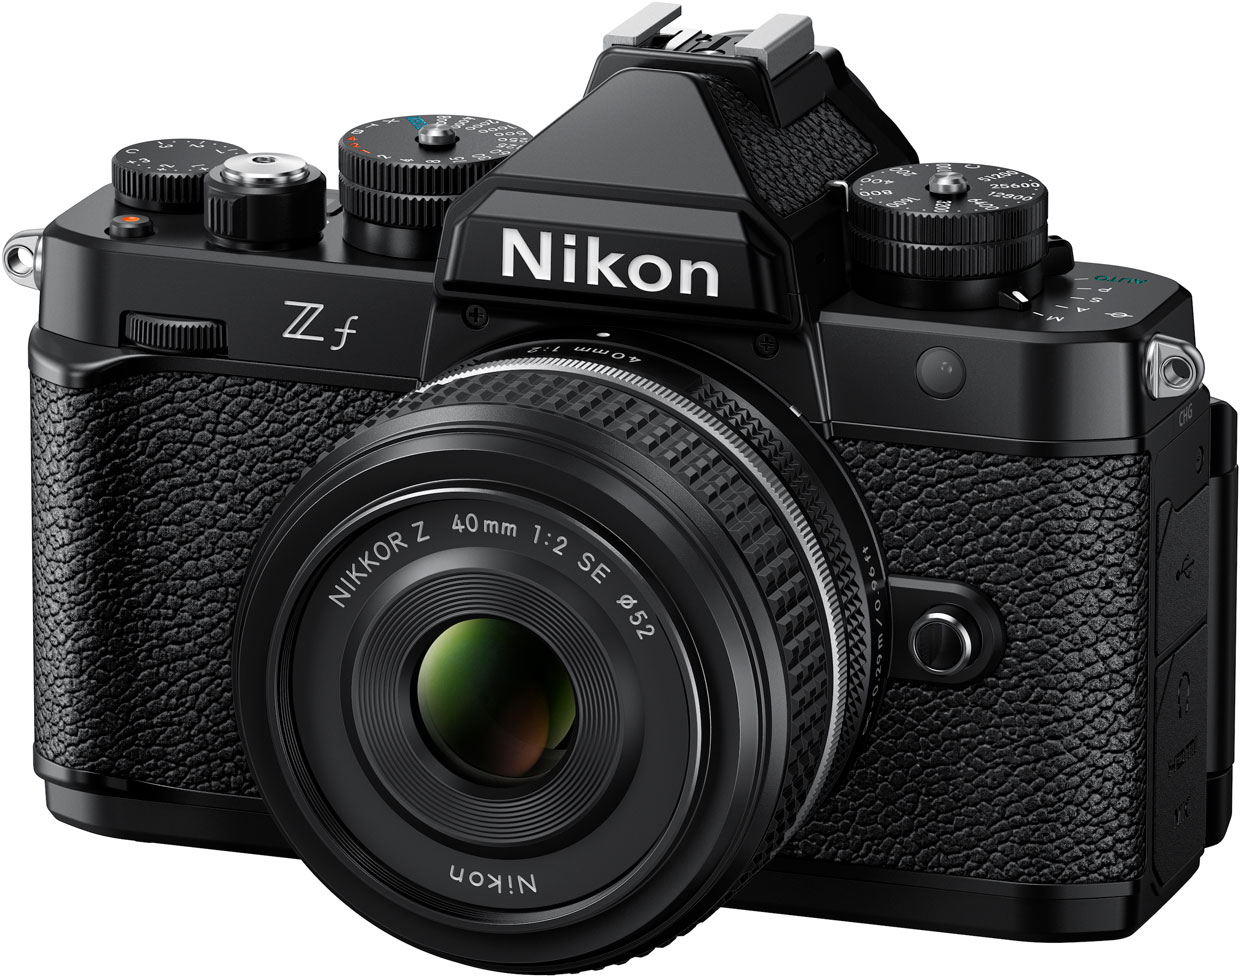 Nikon Unveils the Z f Full-Frame Mirrorless Camera: A Fusion of Heritage Design and Cutting-Edge Technology